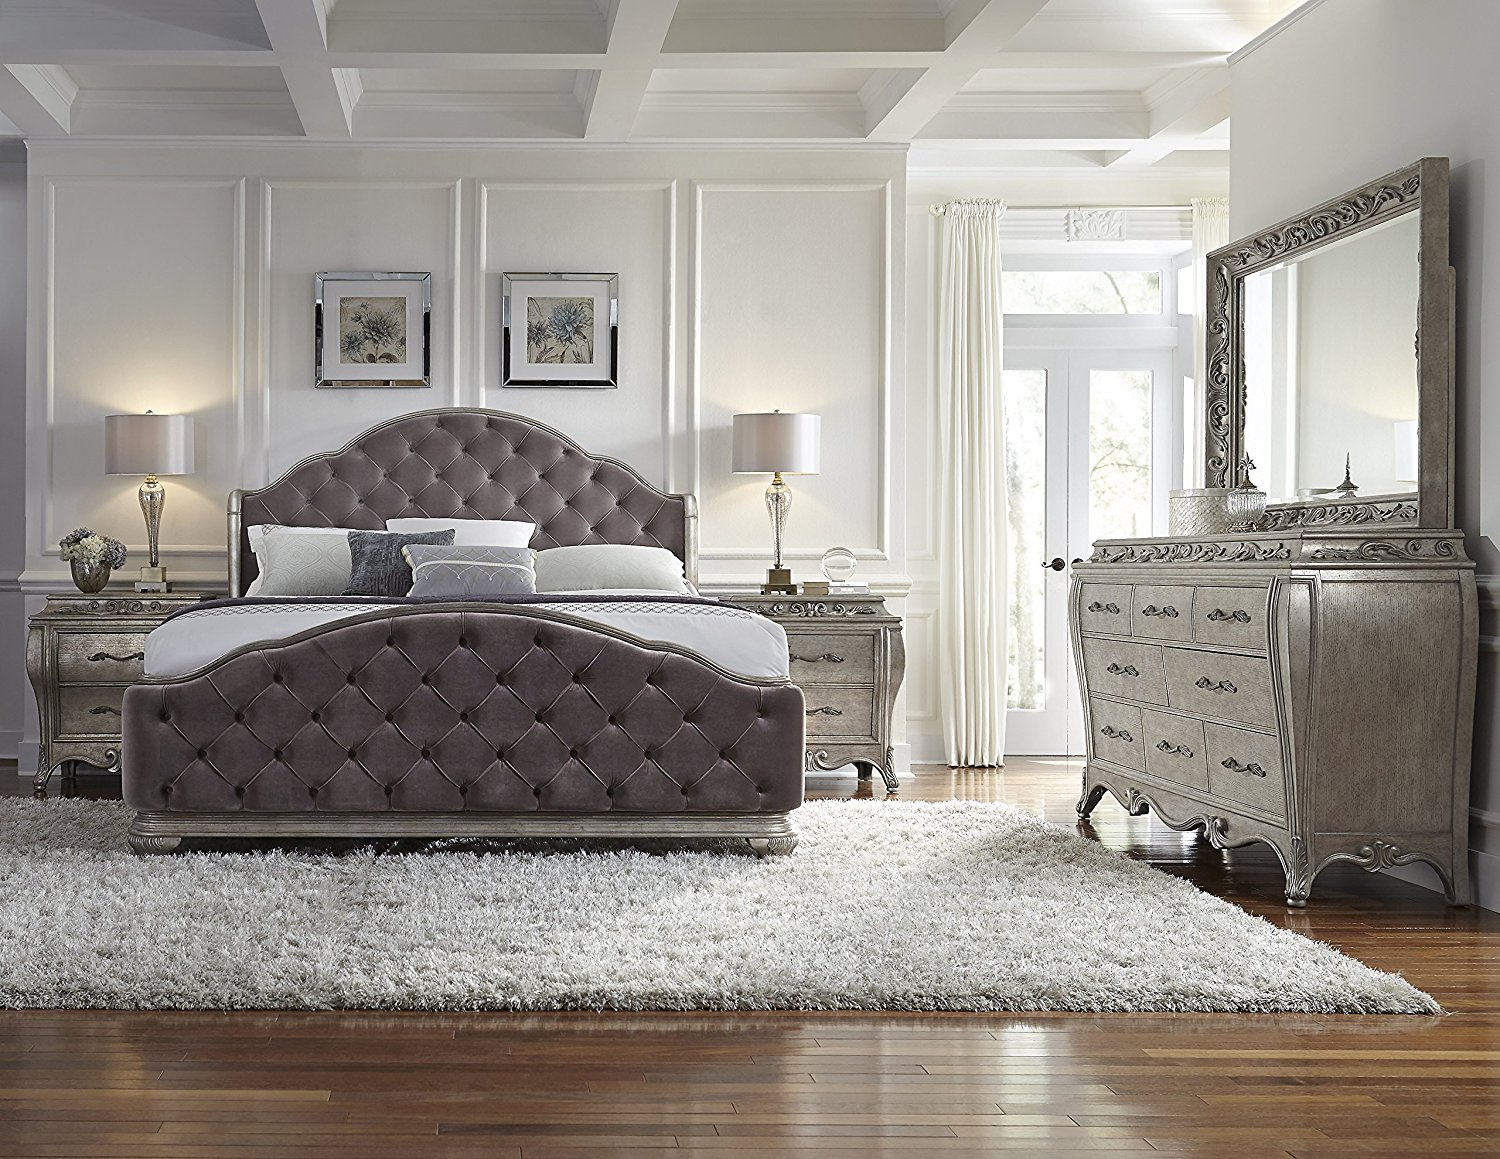 Awesome Upholstered Headboard Bedroom Sets Show Gopher with regard to measurements 1500 X 1159